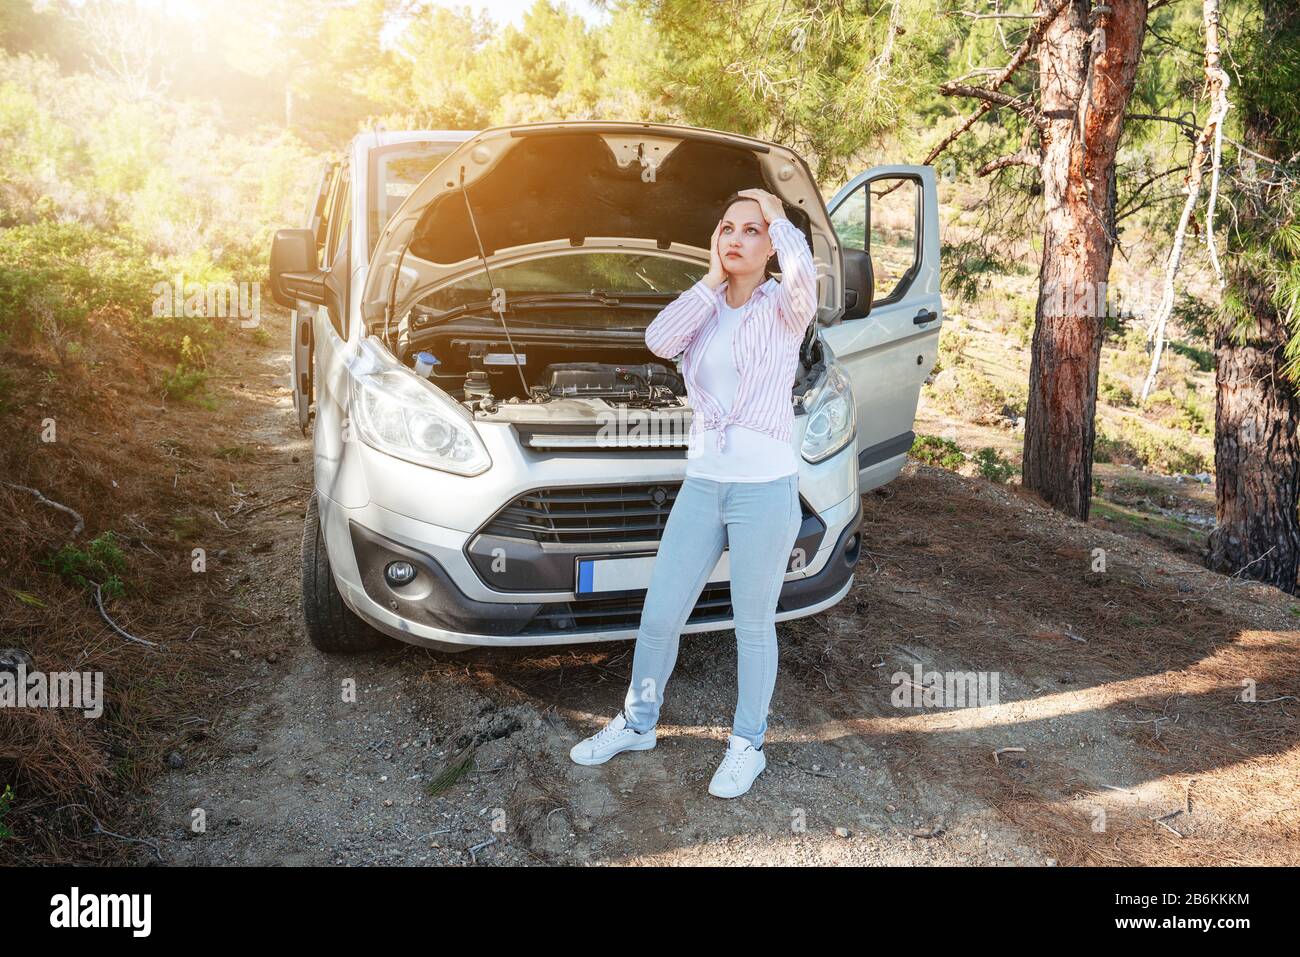 Woman is waiting desperately with open car hood for support of troubleshoot automobile. Transportation and vehicle concept Stock Photo